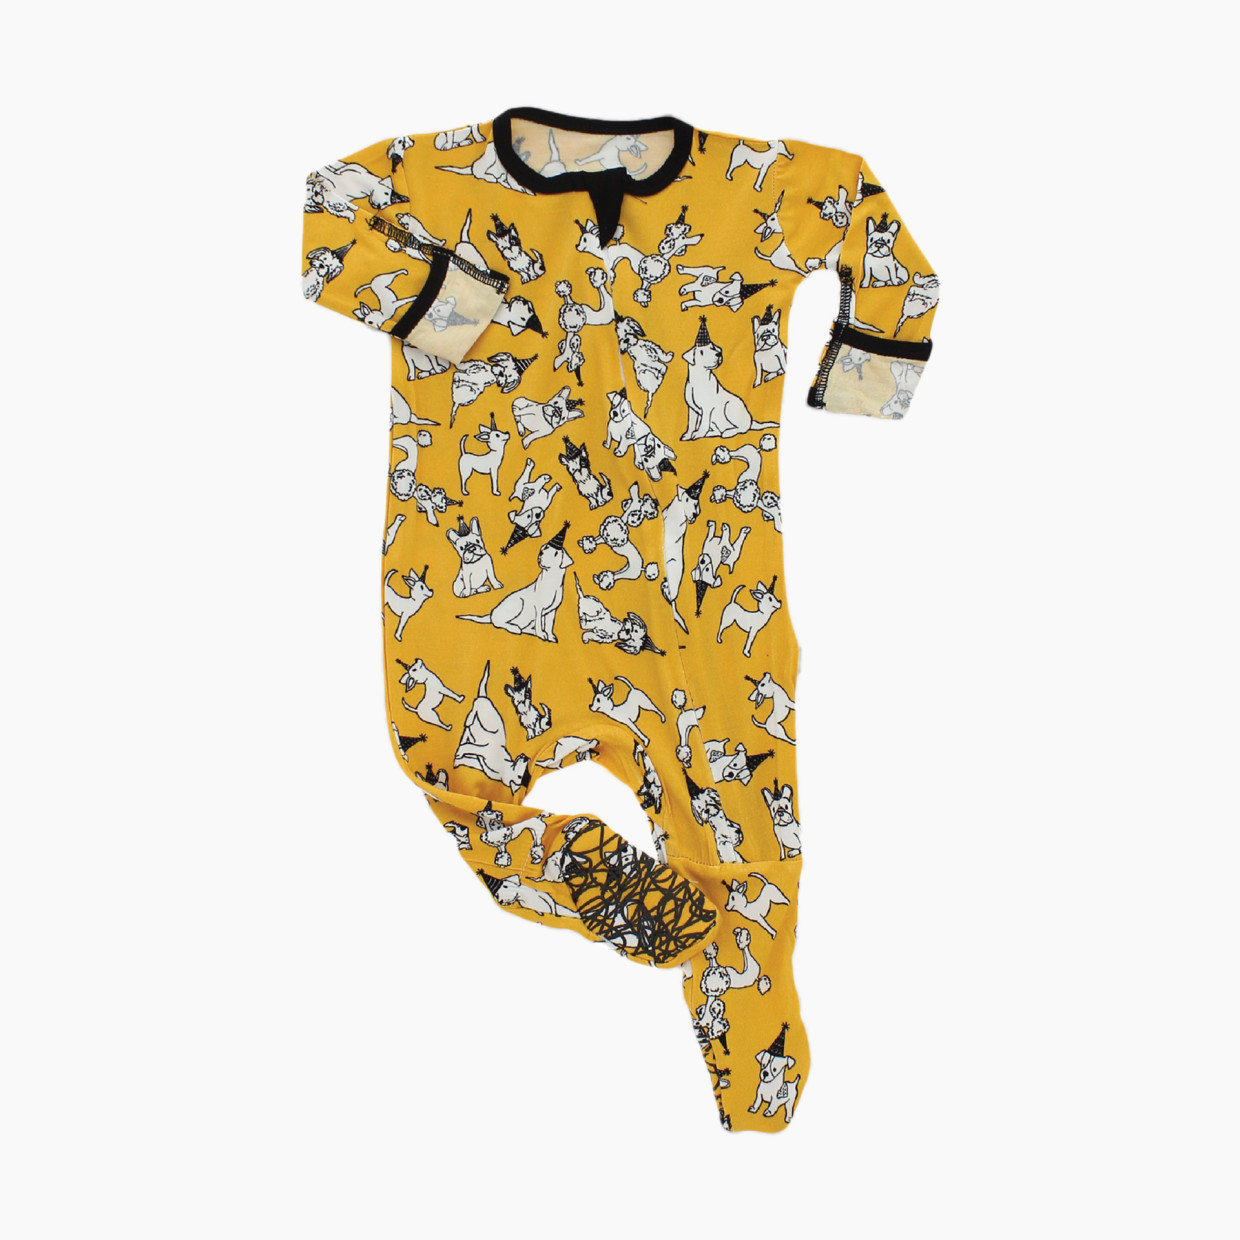 Peregrine Kidswear Footed Sleeper - Party Dogs, 9-12 M.